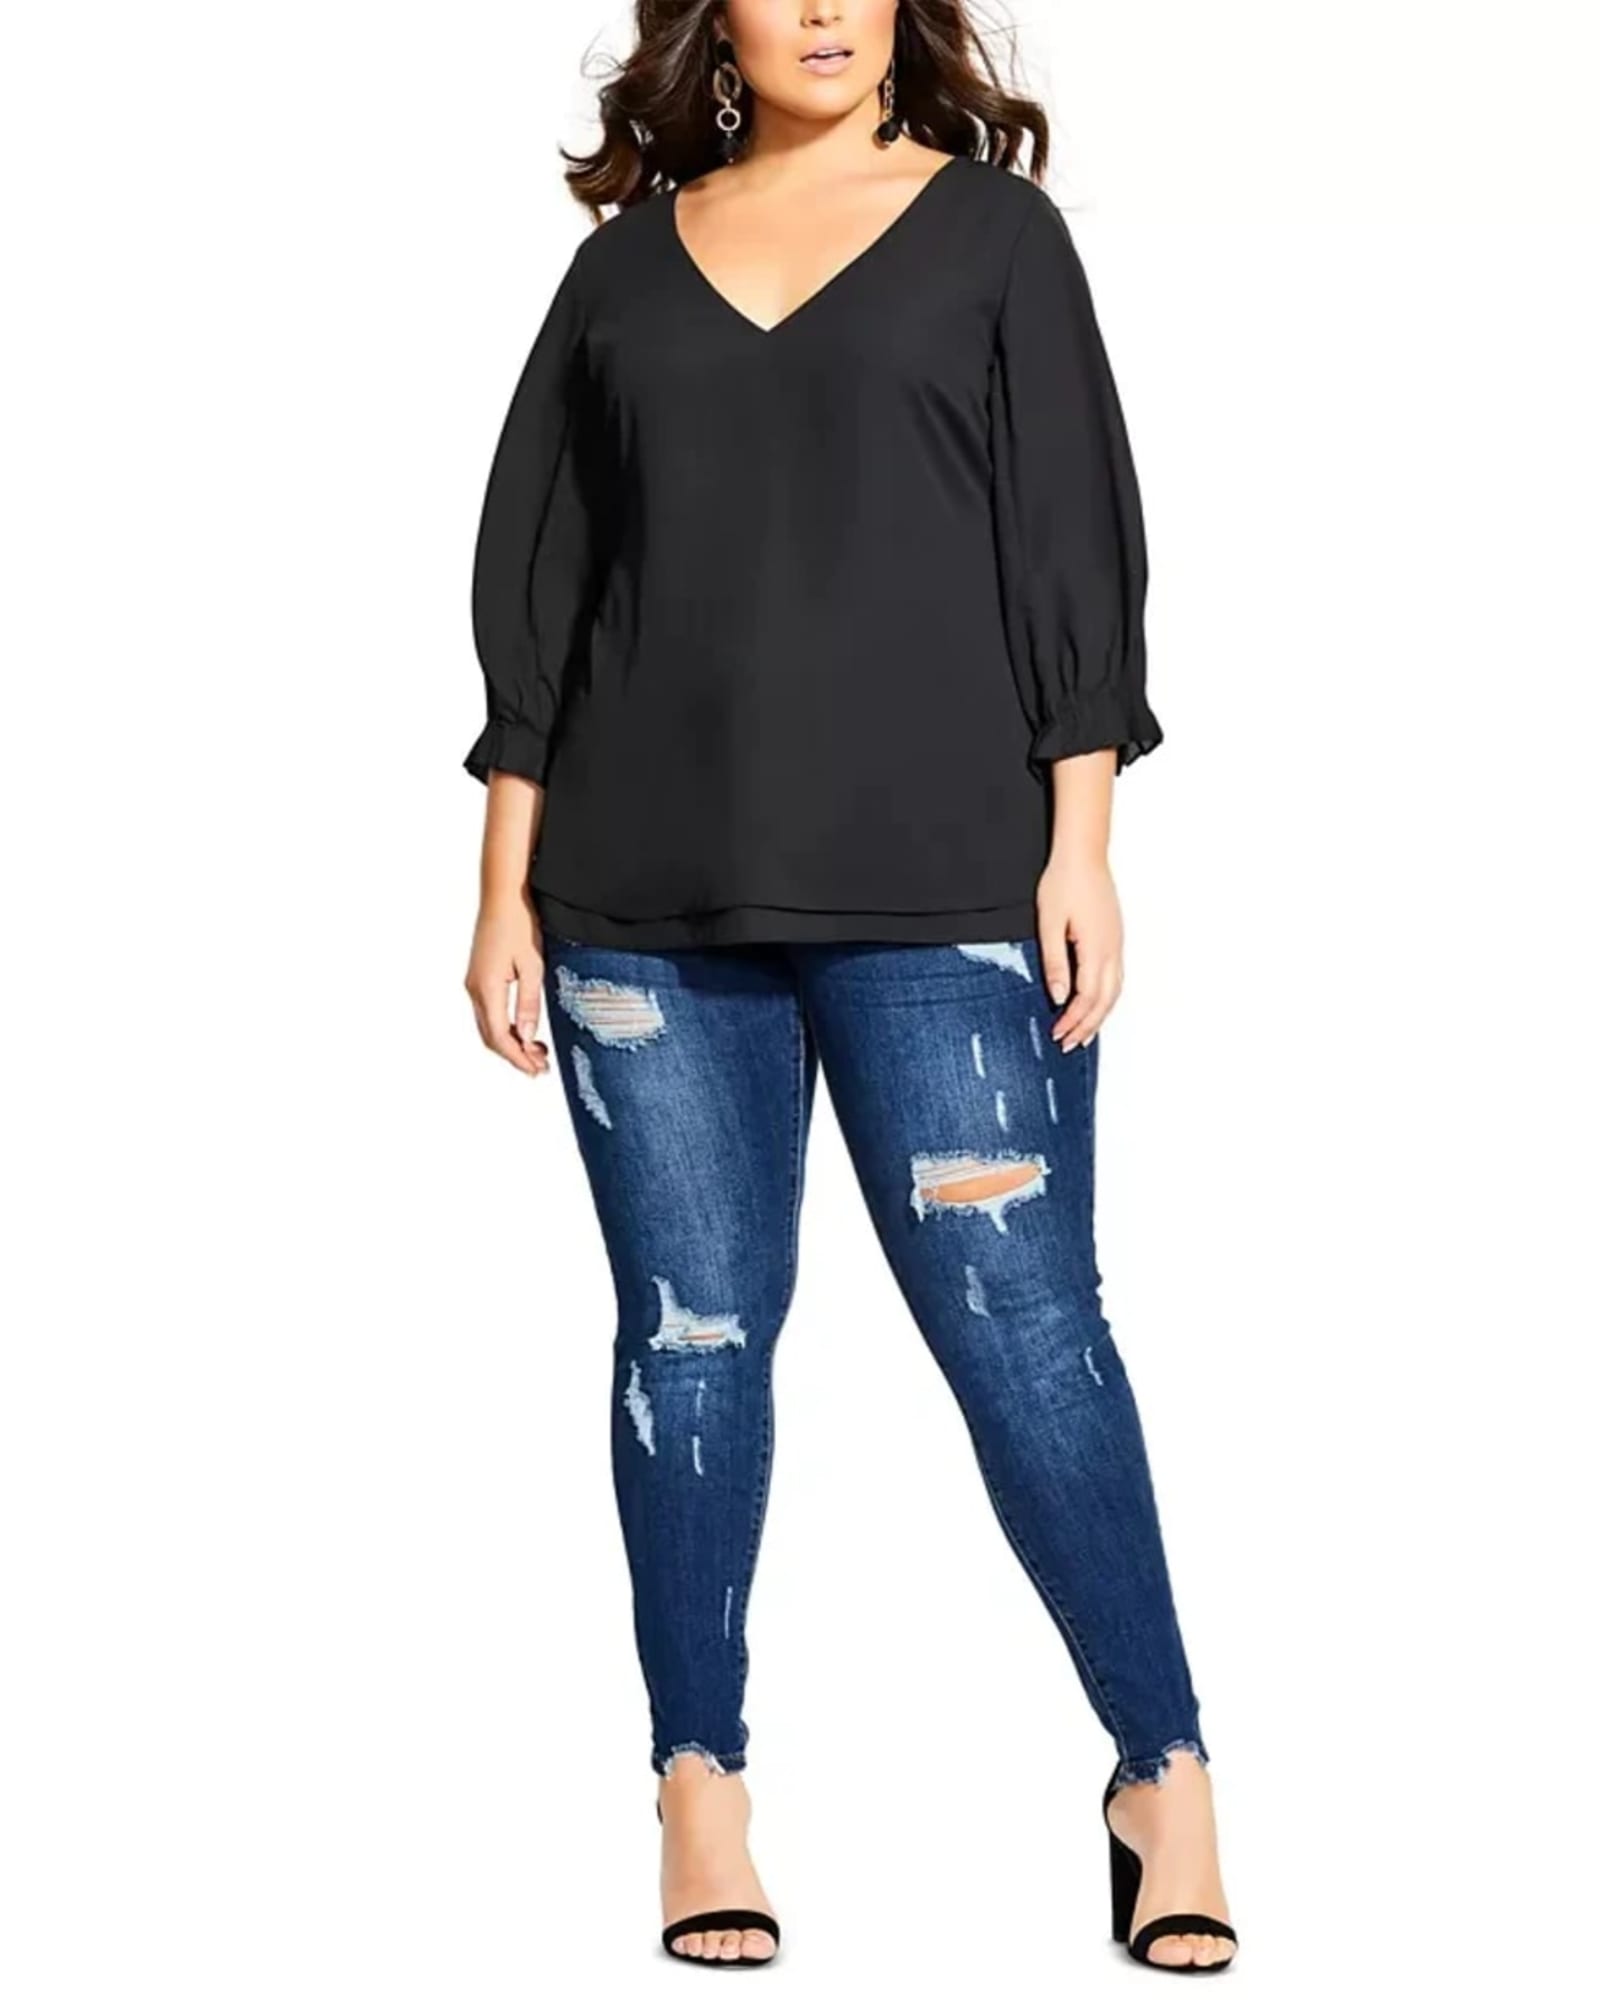 Slimming Tops For Plus Size